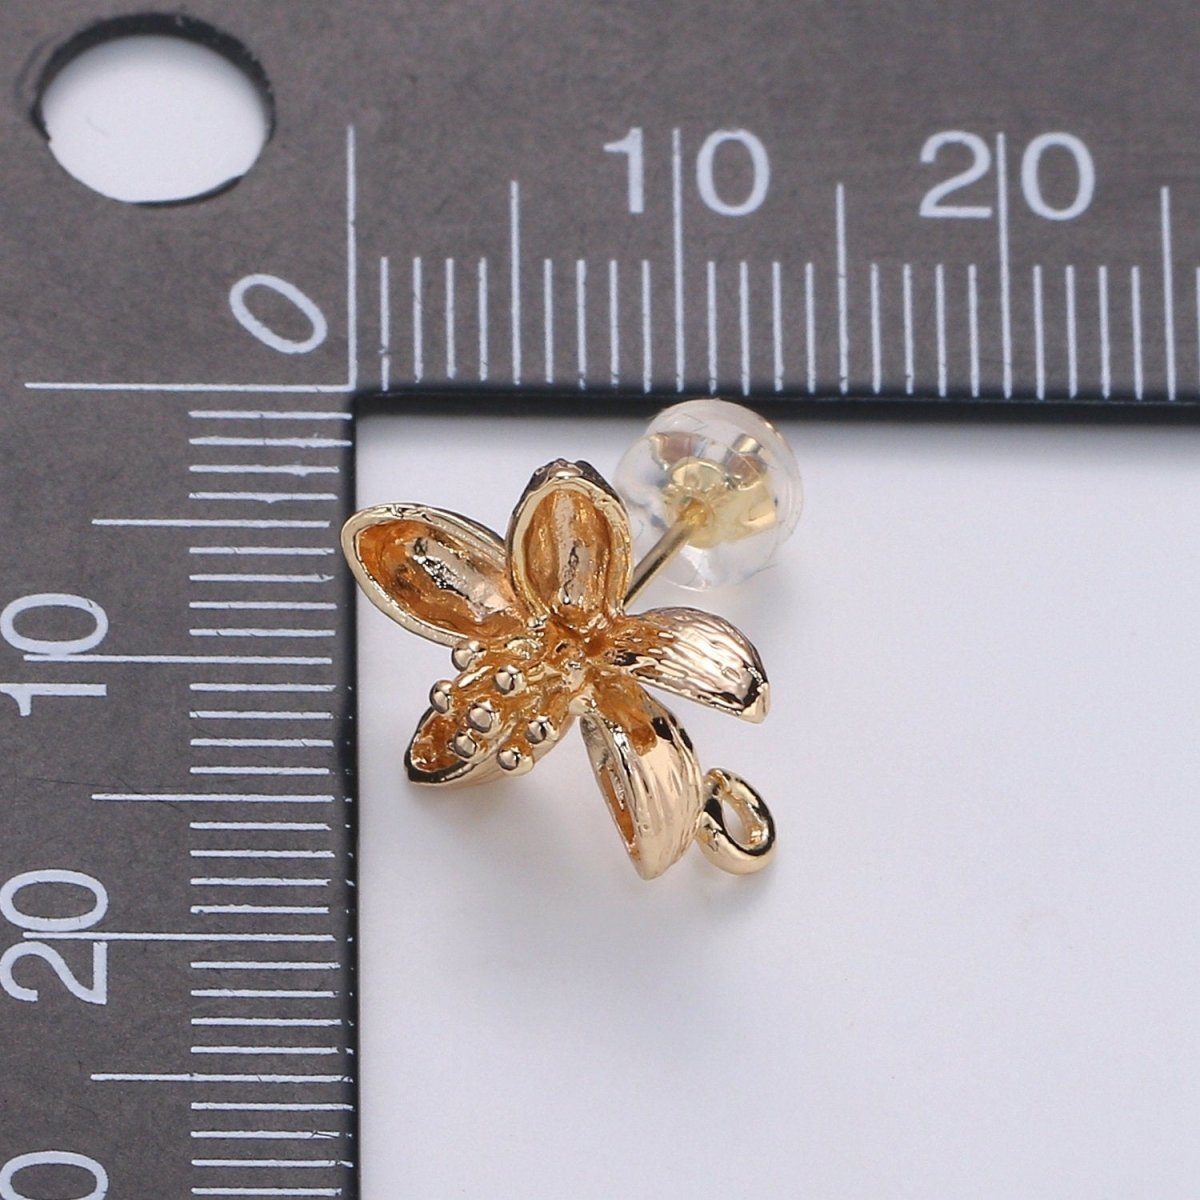 Orchid Flower Stud Earring Gold Vermeil Floral Earring Jewelry Component for Christmas Gift K-399 - DLUXCA